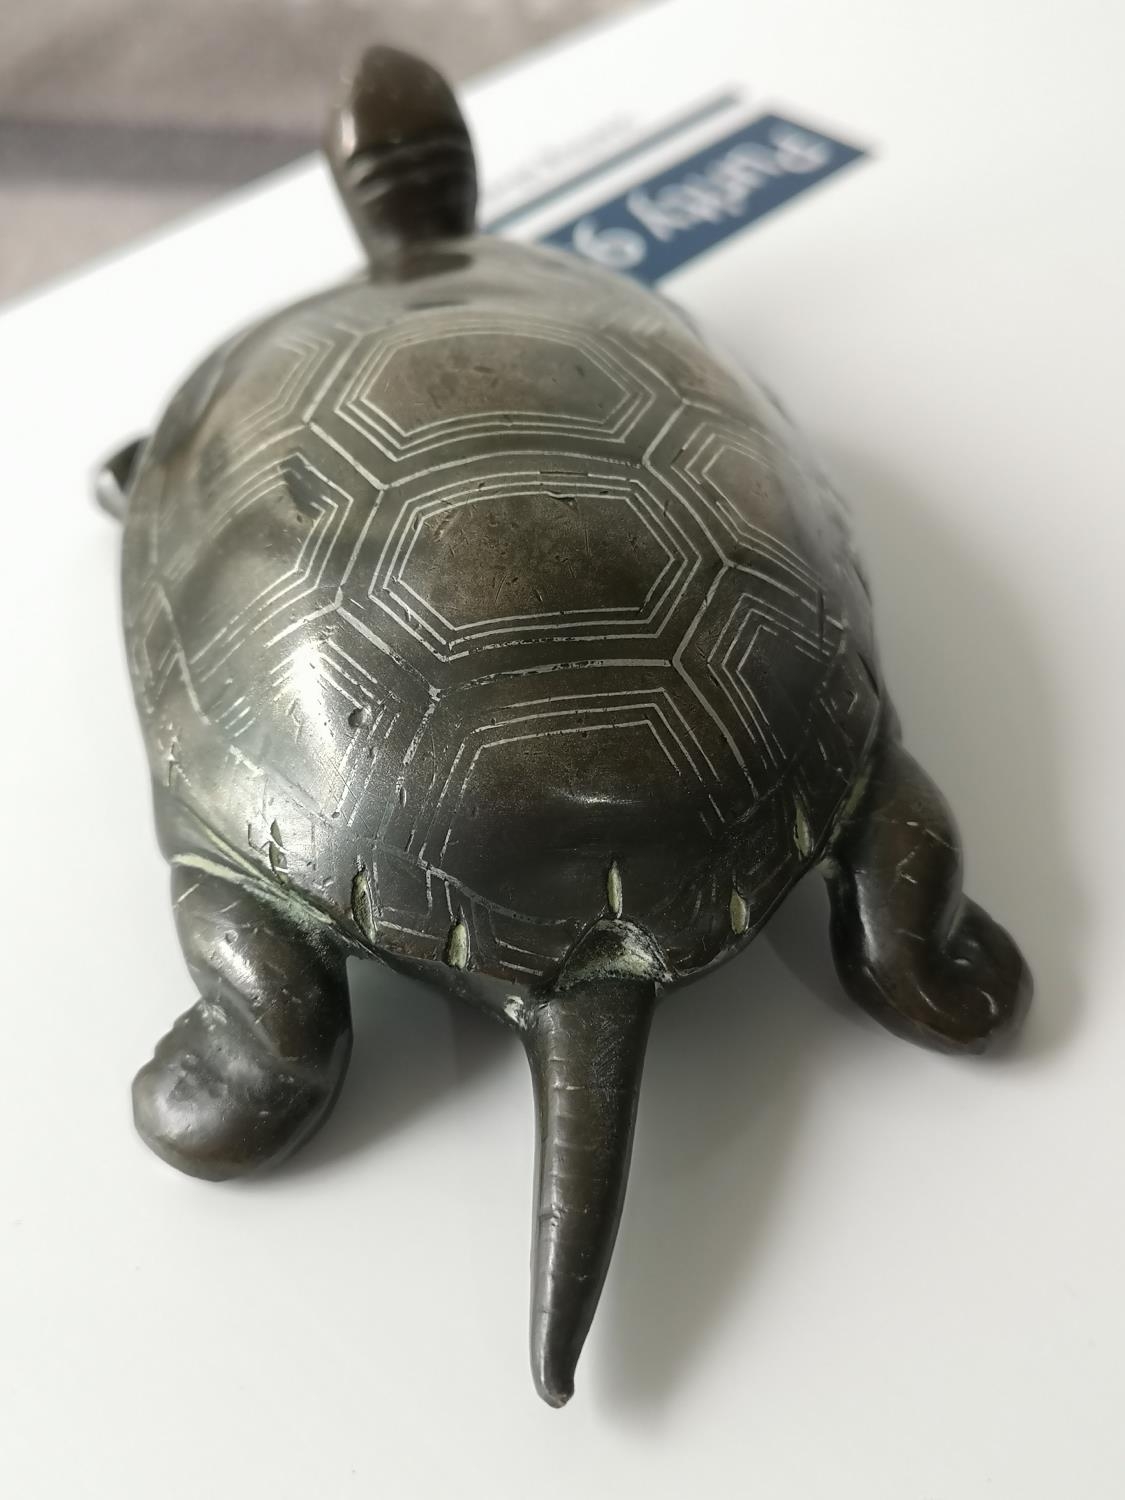 An antique heavy bronze turtle sculpture with silver shell inlay. [3.5x12.5x7cm] - Image 3 of 5